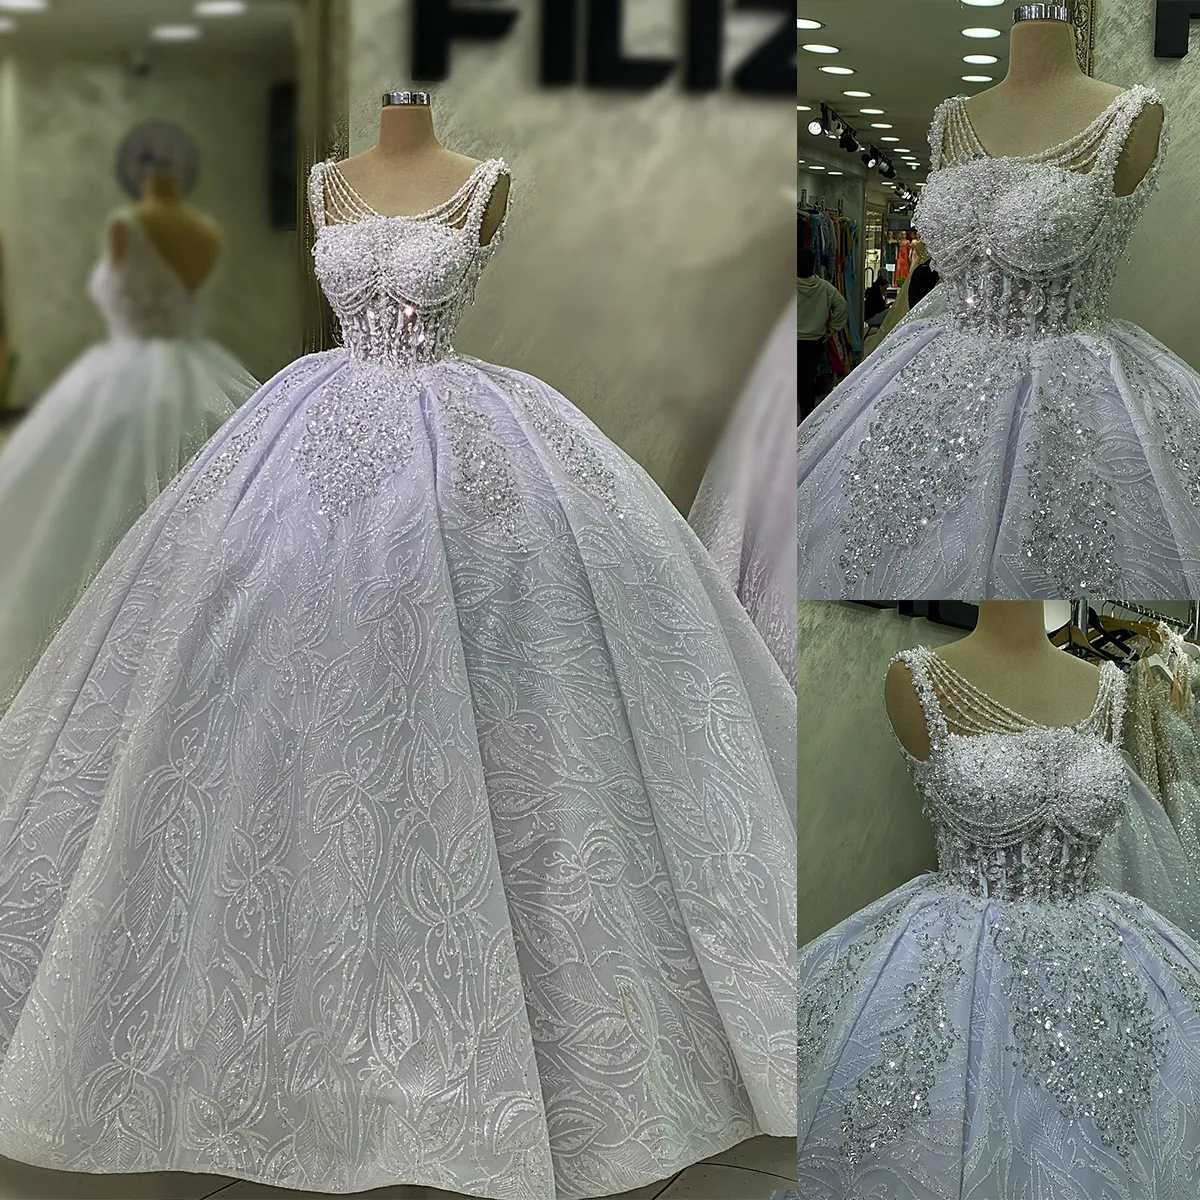 Luxury Ball Gown Wedding Dresses Jewel Designer Pearls Shining Sequins Applicant Backless Pleats Court Gown Custom Plus Size Made Bridal Gown Vestidos De Novia